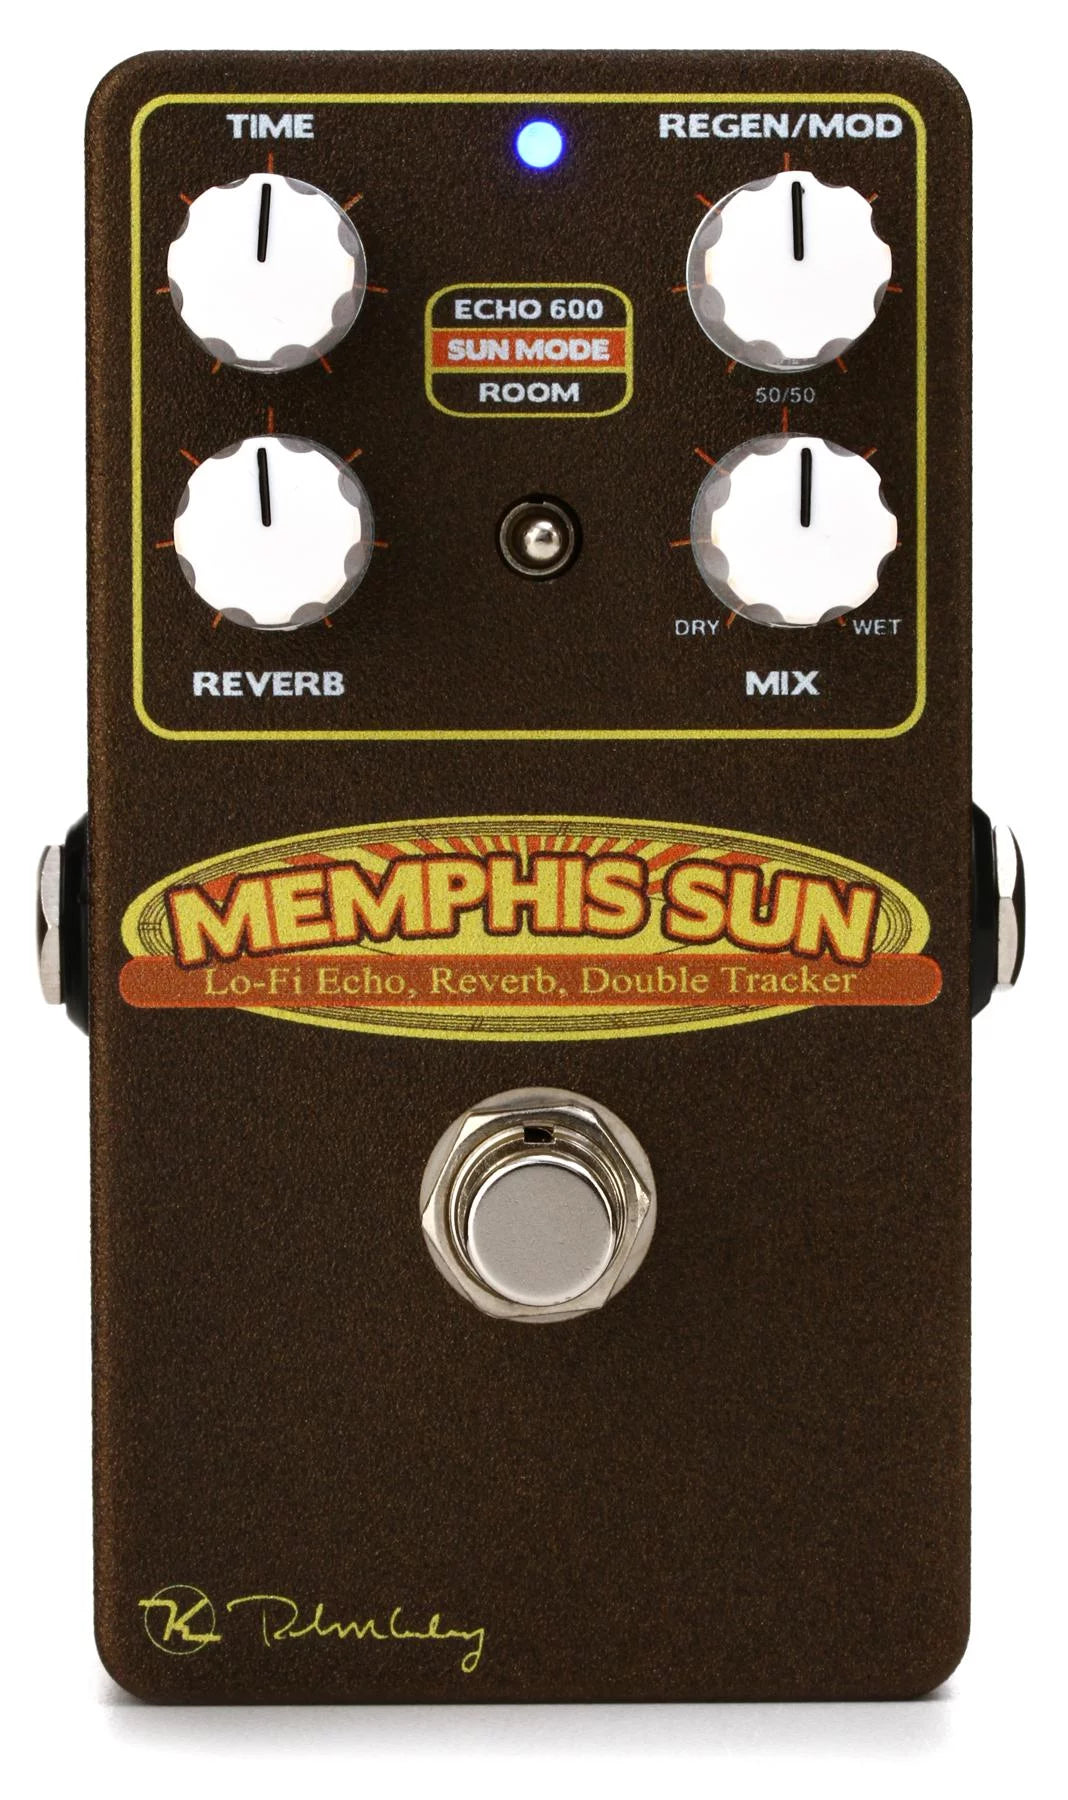 Keeley Memphis Sun Lo-Fi Reverb Echo and Double Tracker Pedal